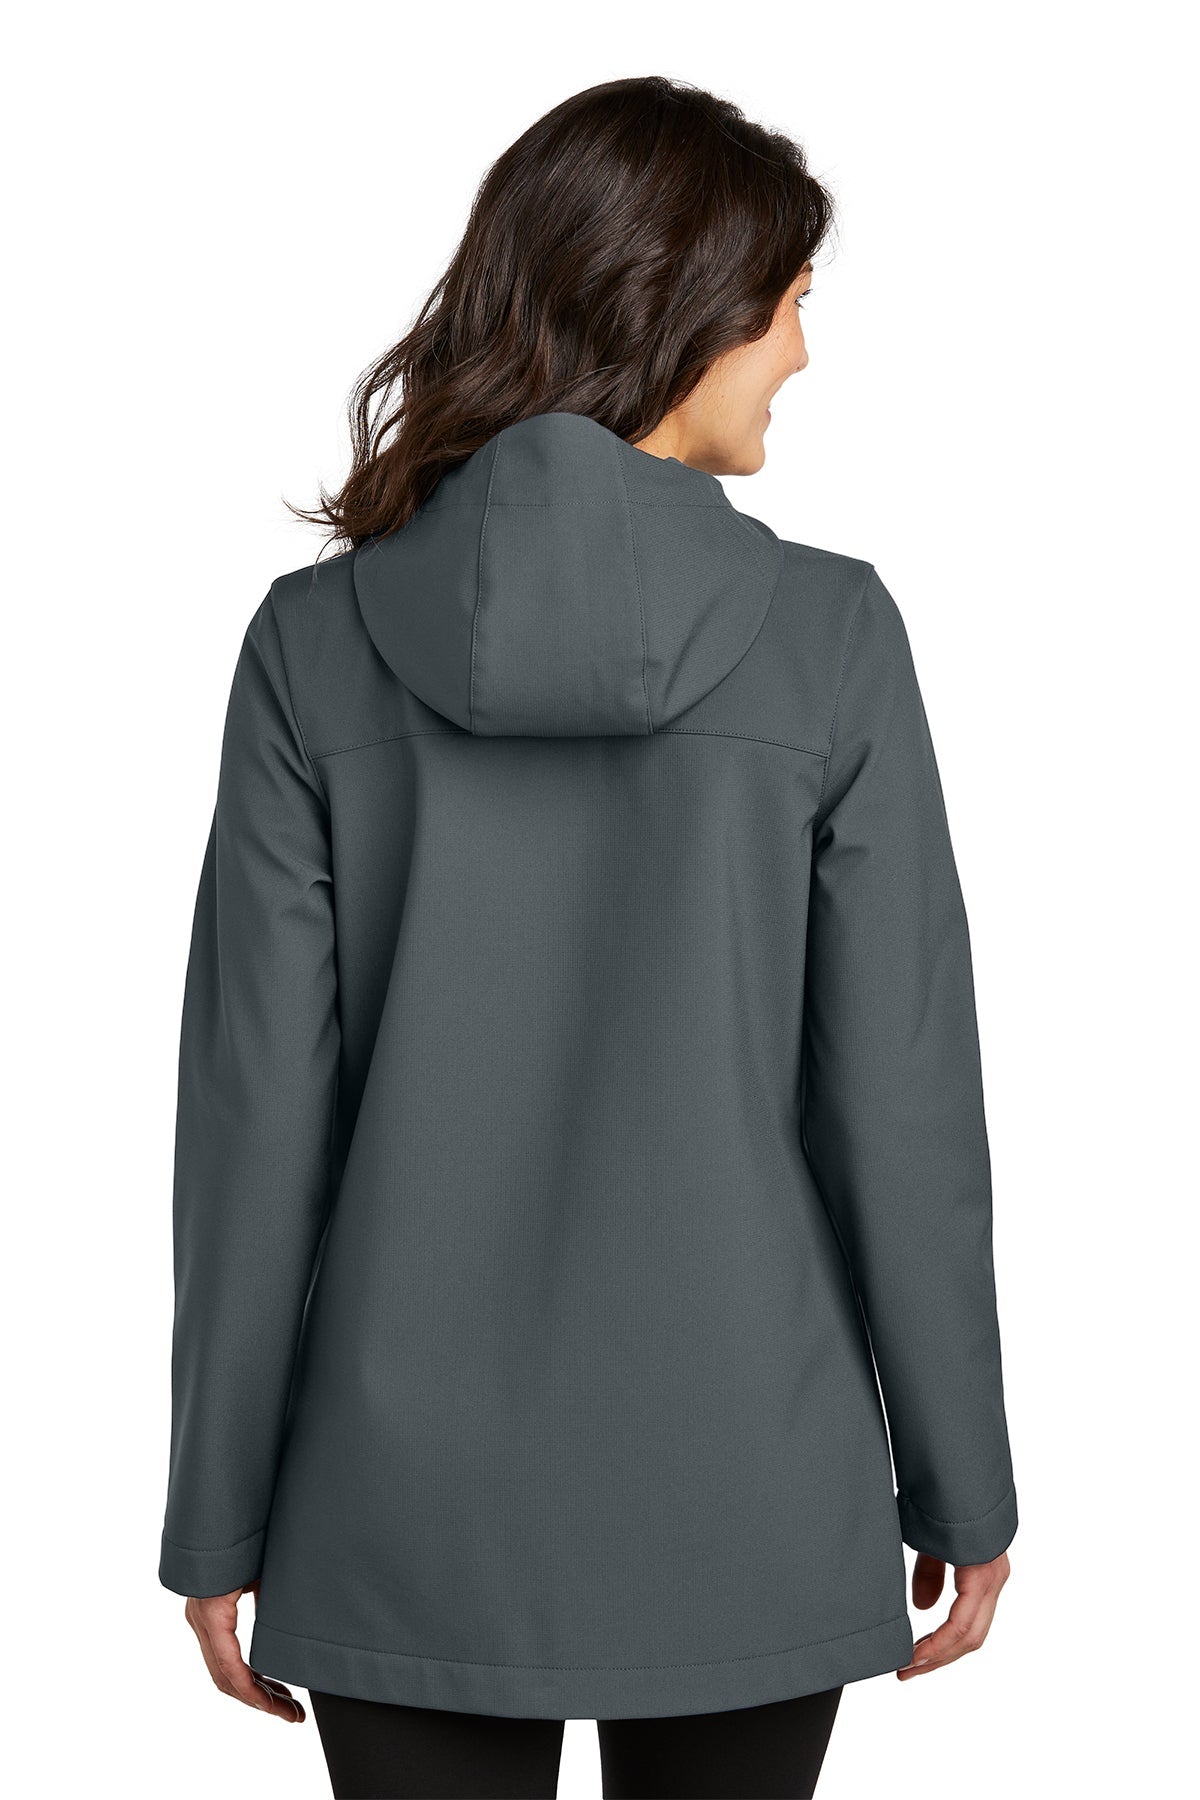 Port Authority Ladies Collective Outer Soft Shell Customized Parkas, Graphite